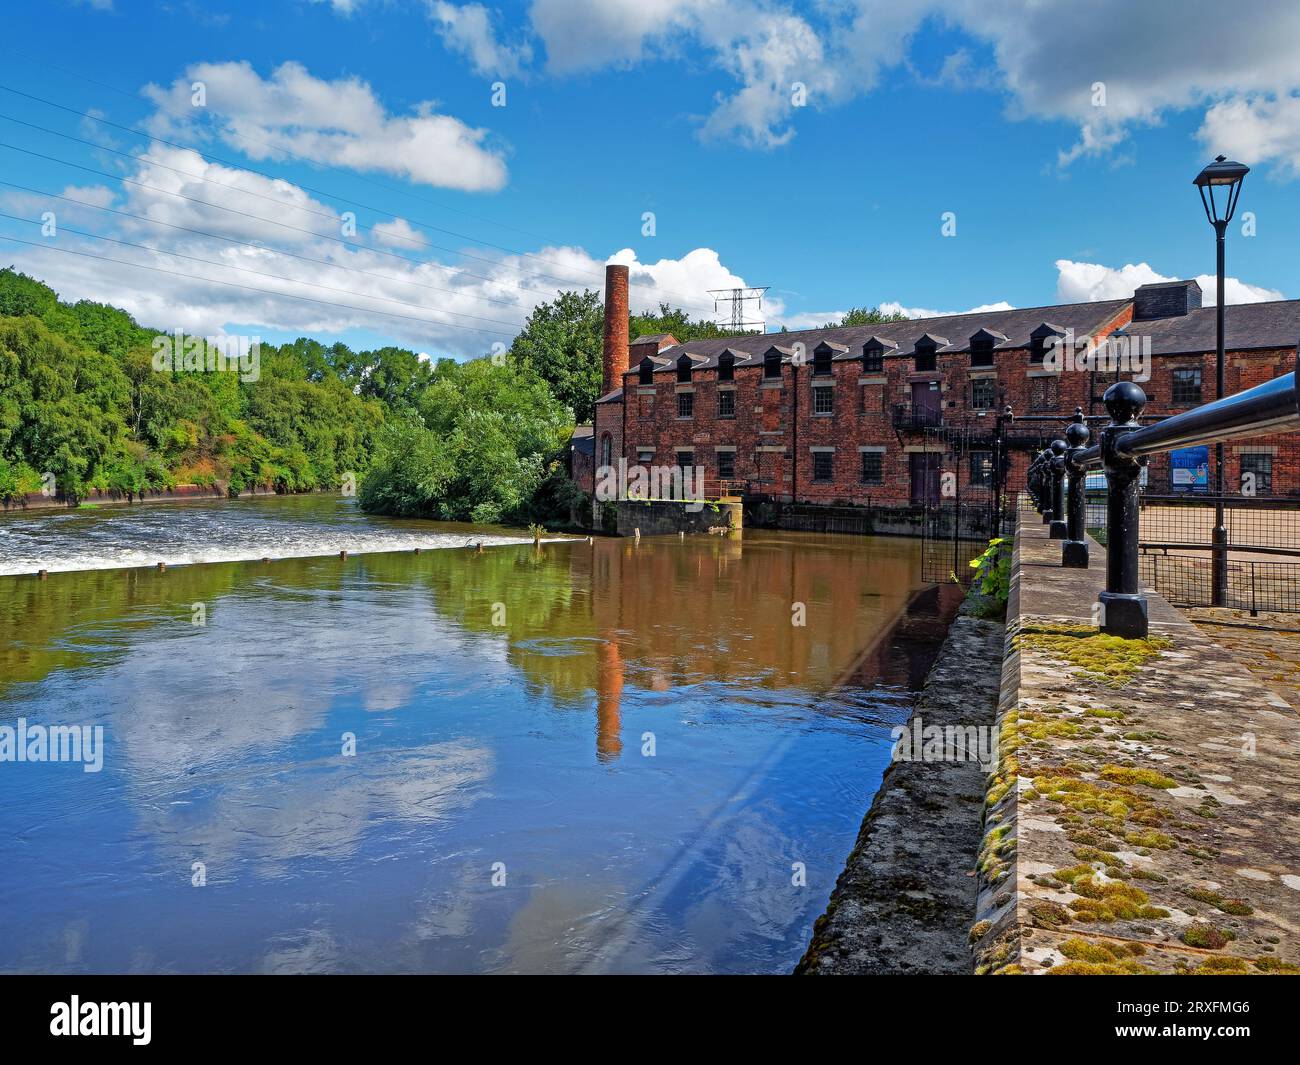 UK, West Yorkshire, Leeds, View of River Aire and Thwaite Mills Watermill. Stock Photo